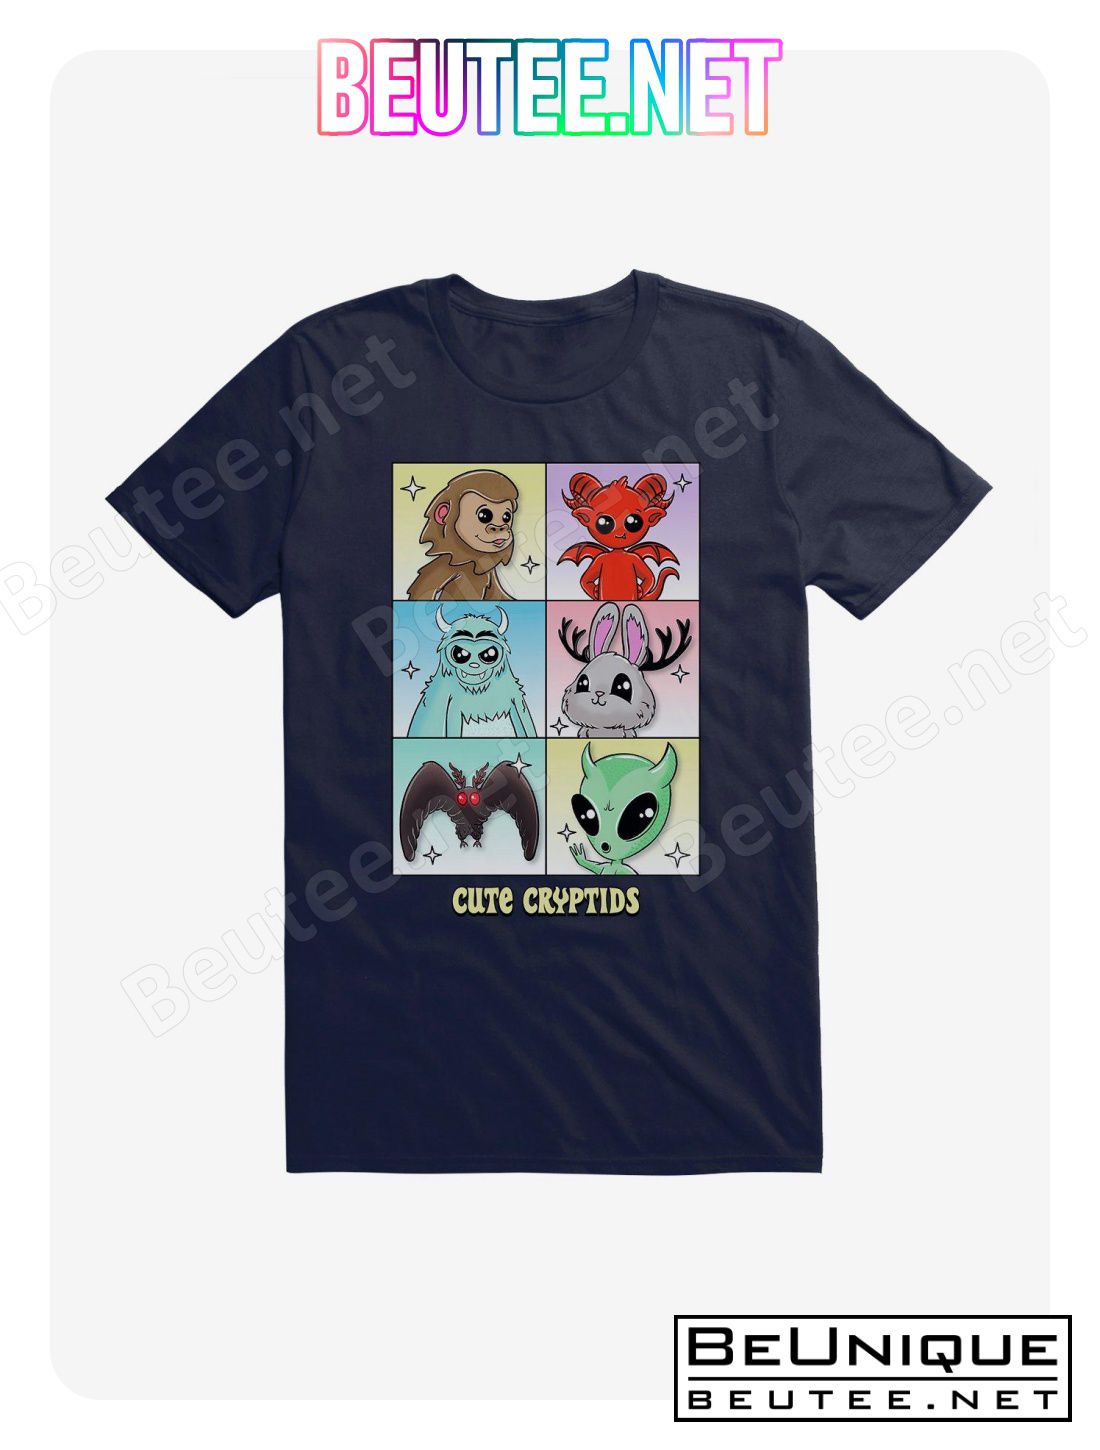 Cute Cryptid Bunch Grid T-Shirt